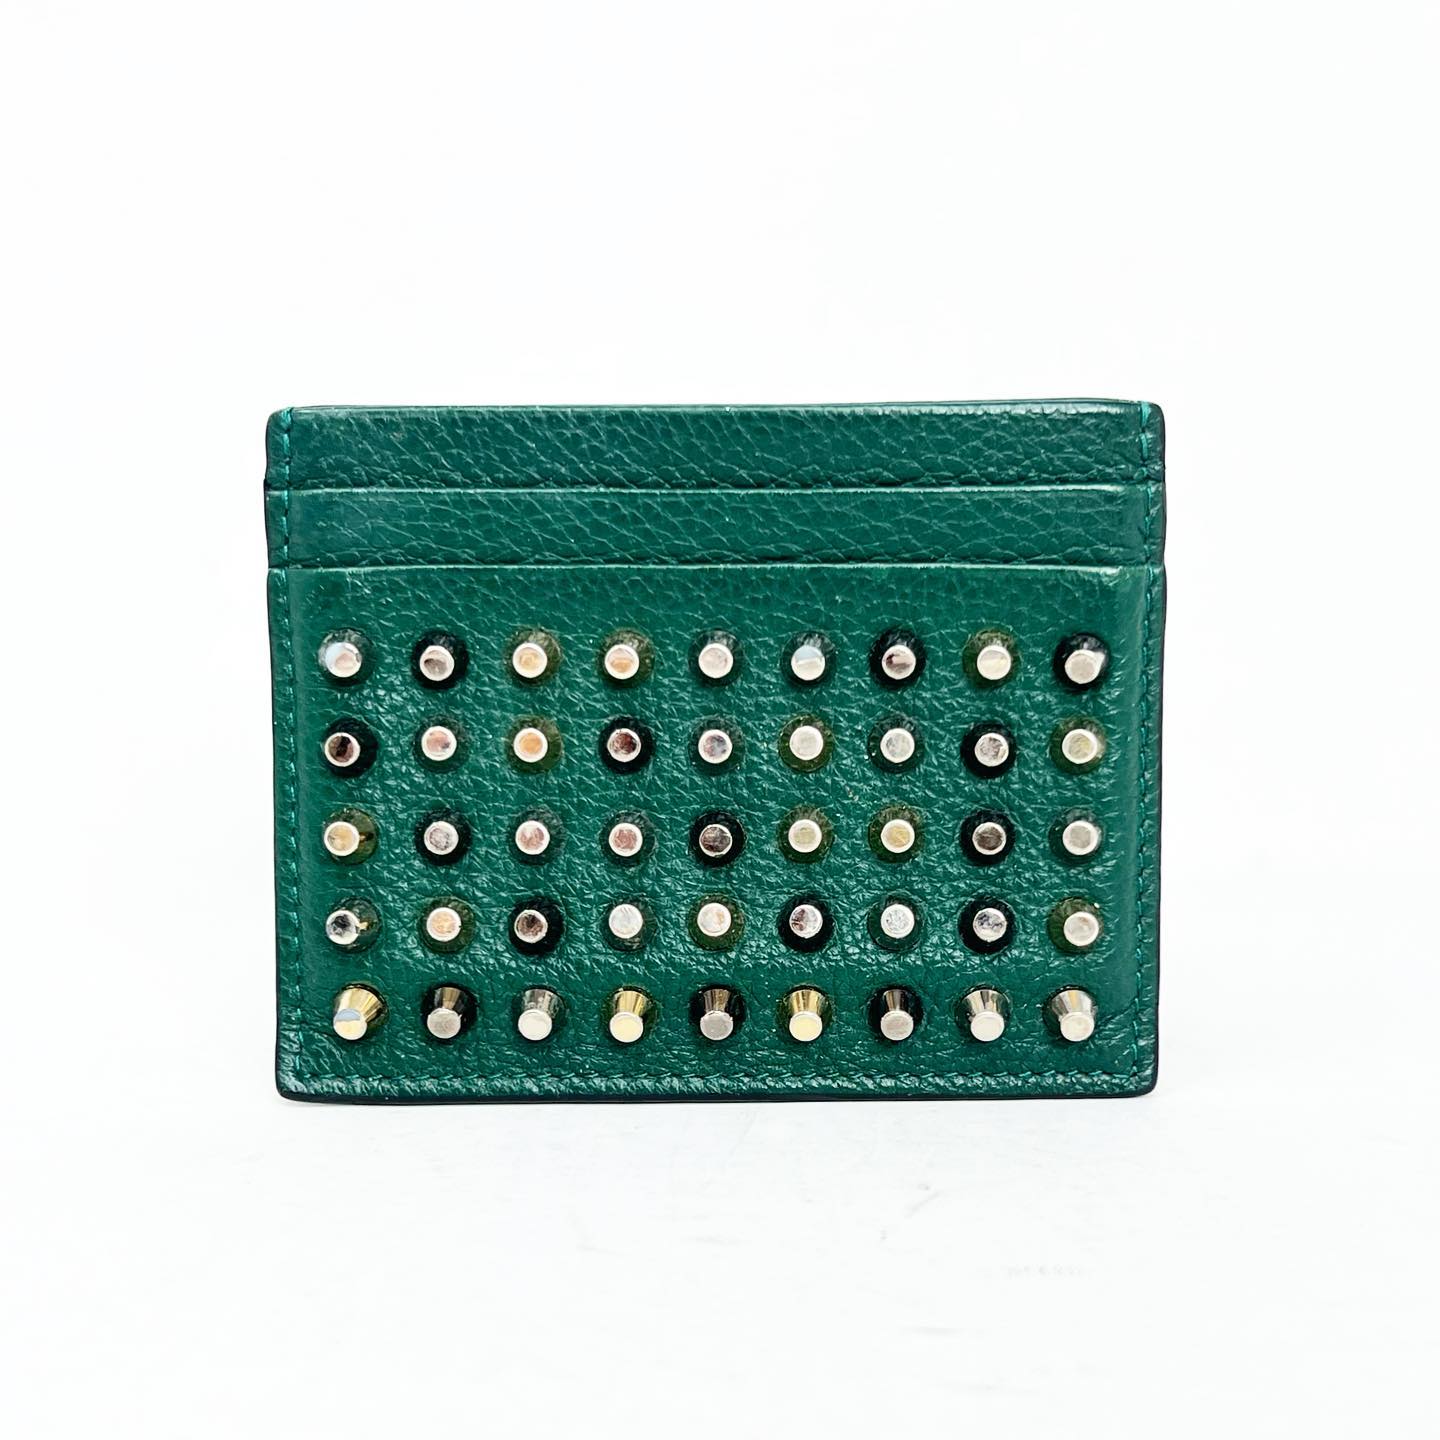 CHRISTIAN LOUBOUTIN #42067 Green Leather Studded Card Holder 1